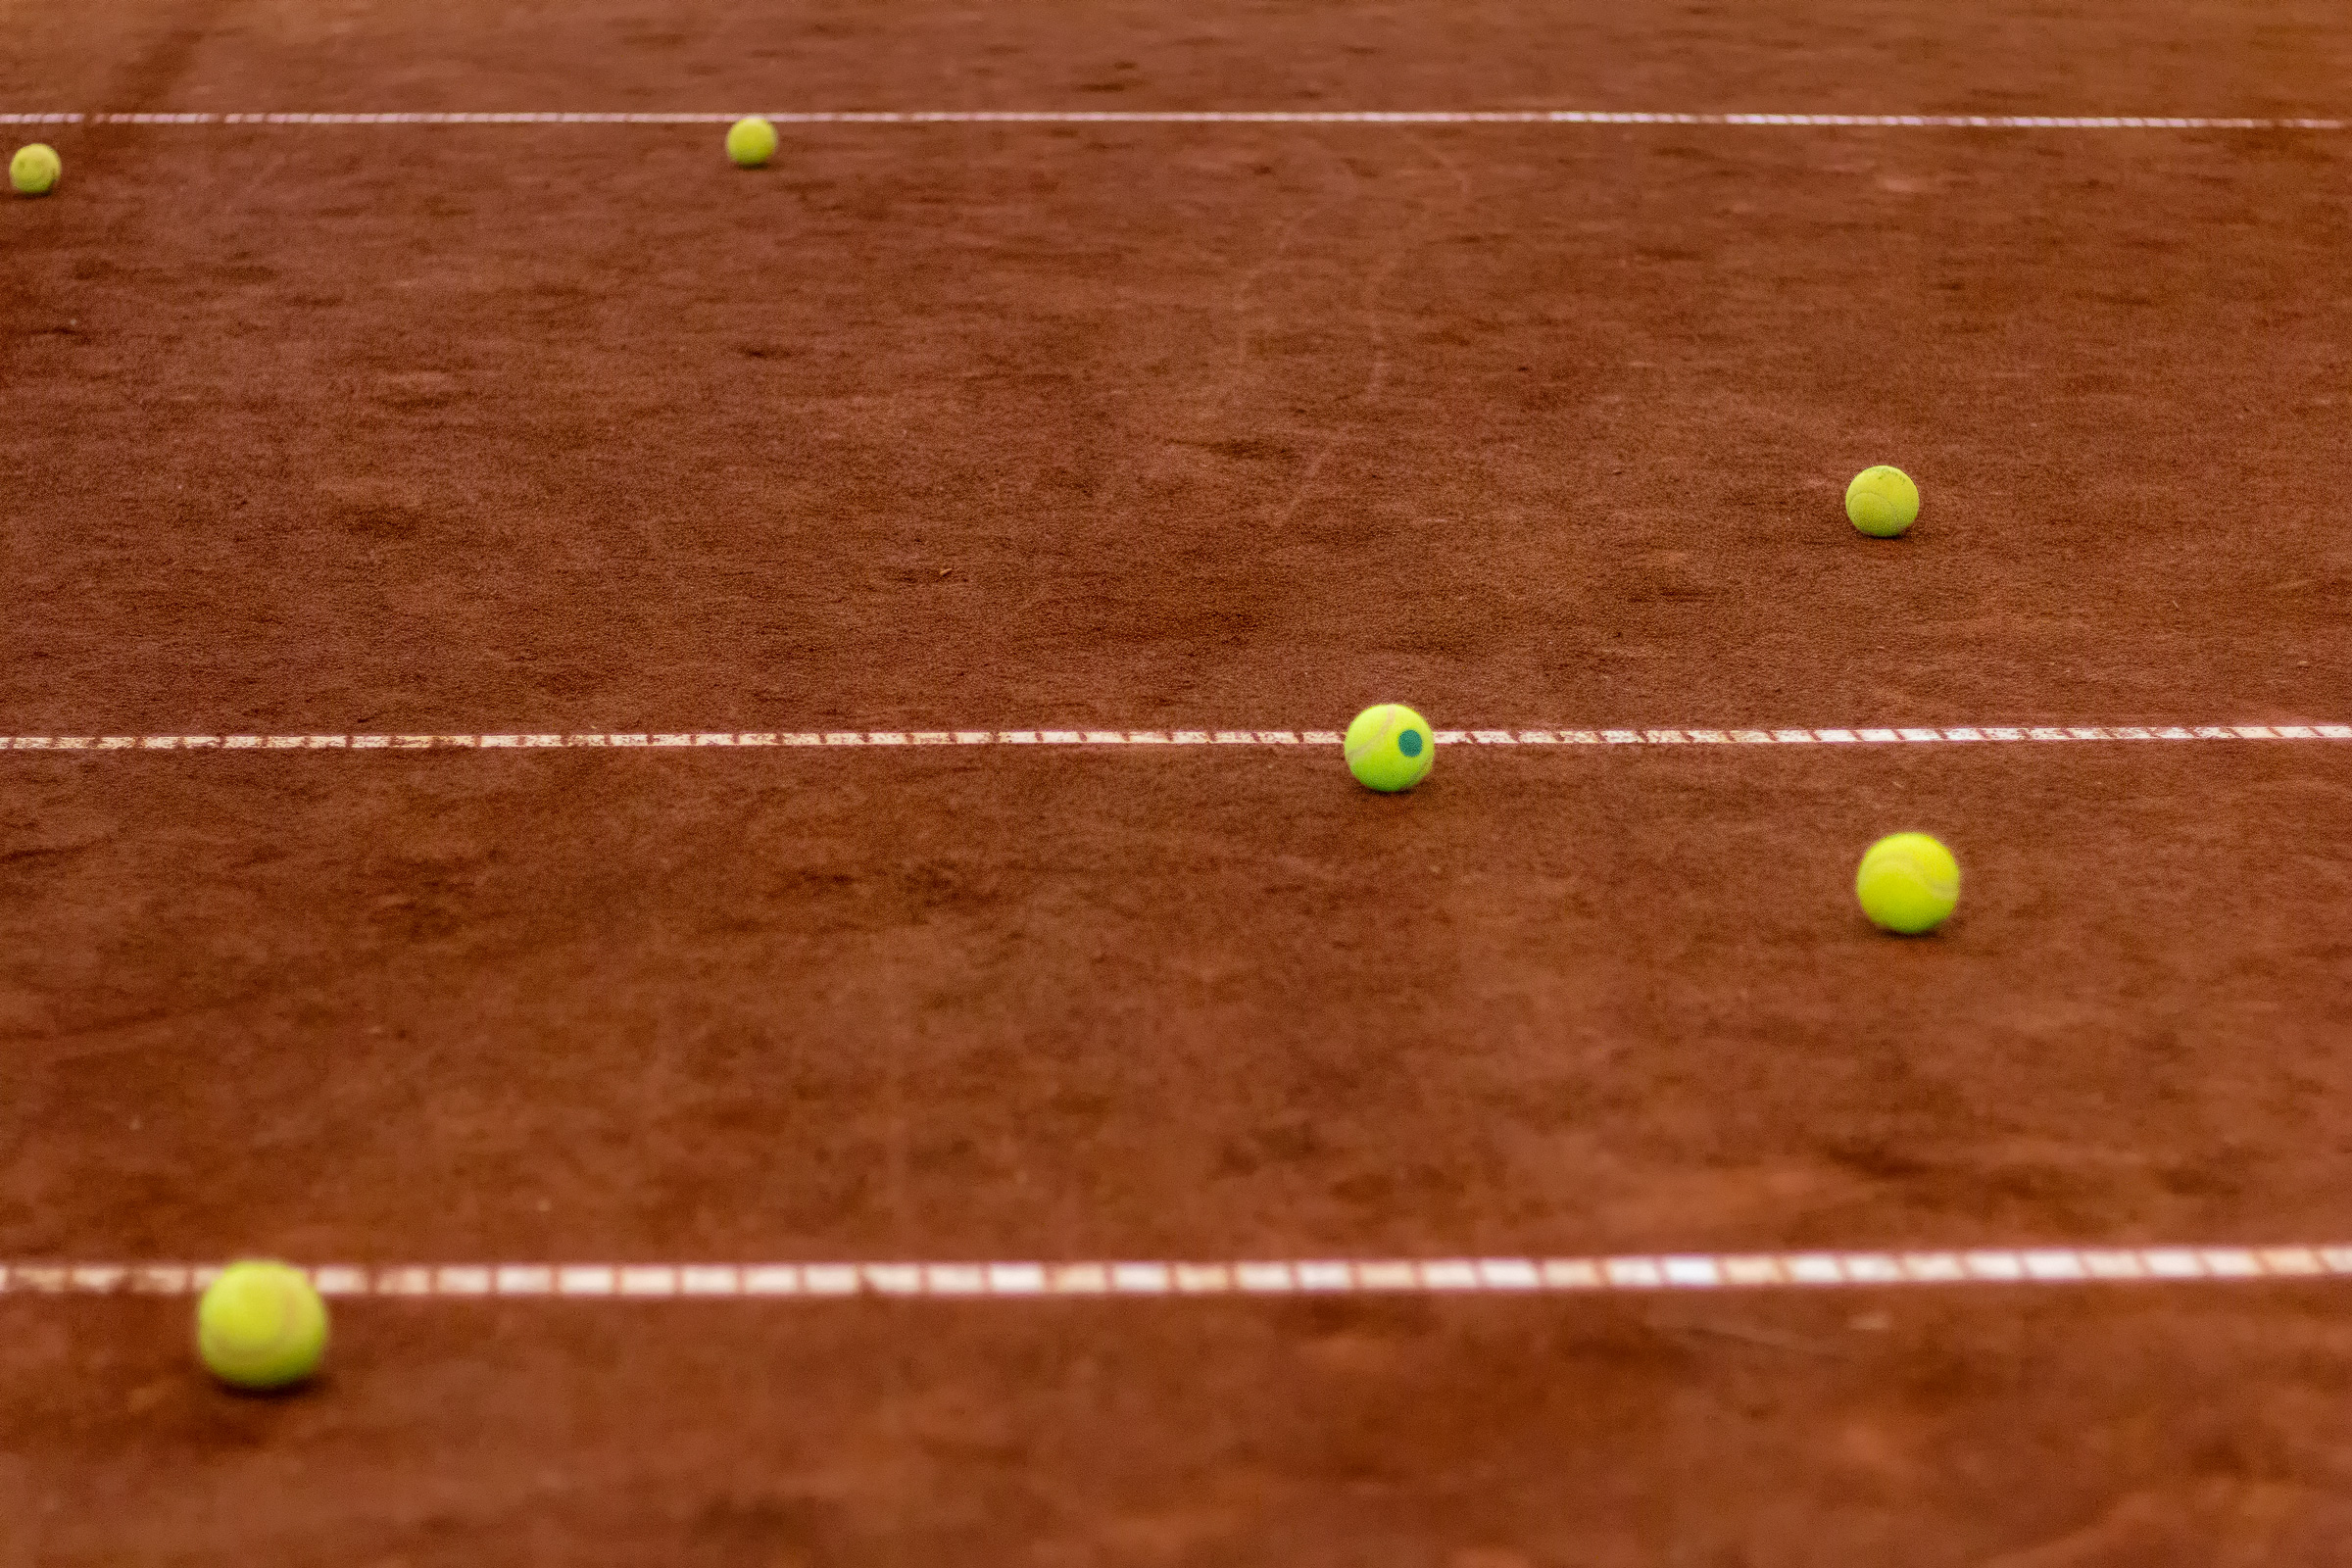 Tennis balls scattered on court